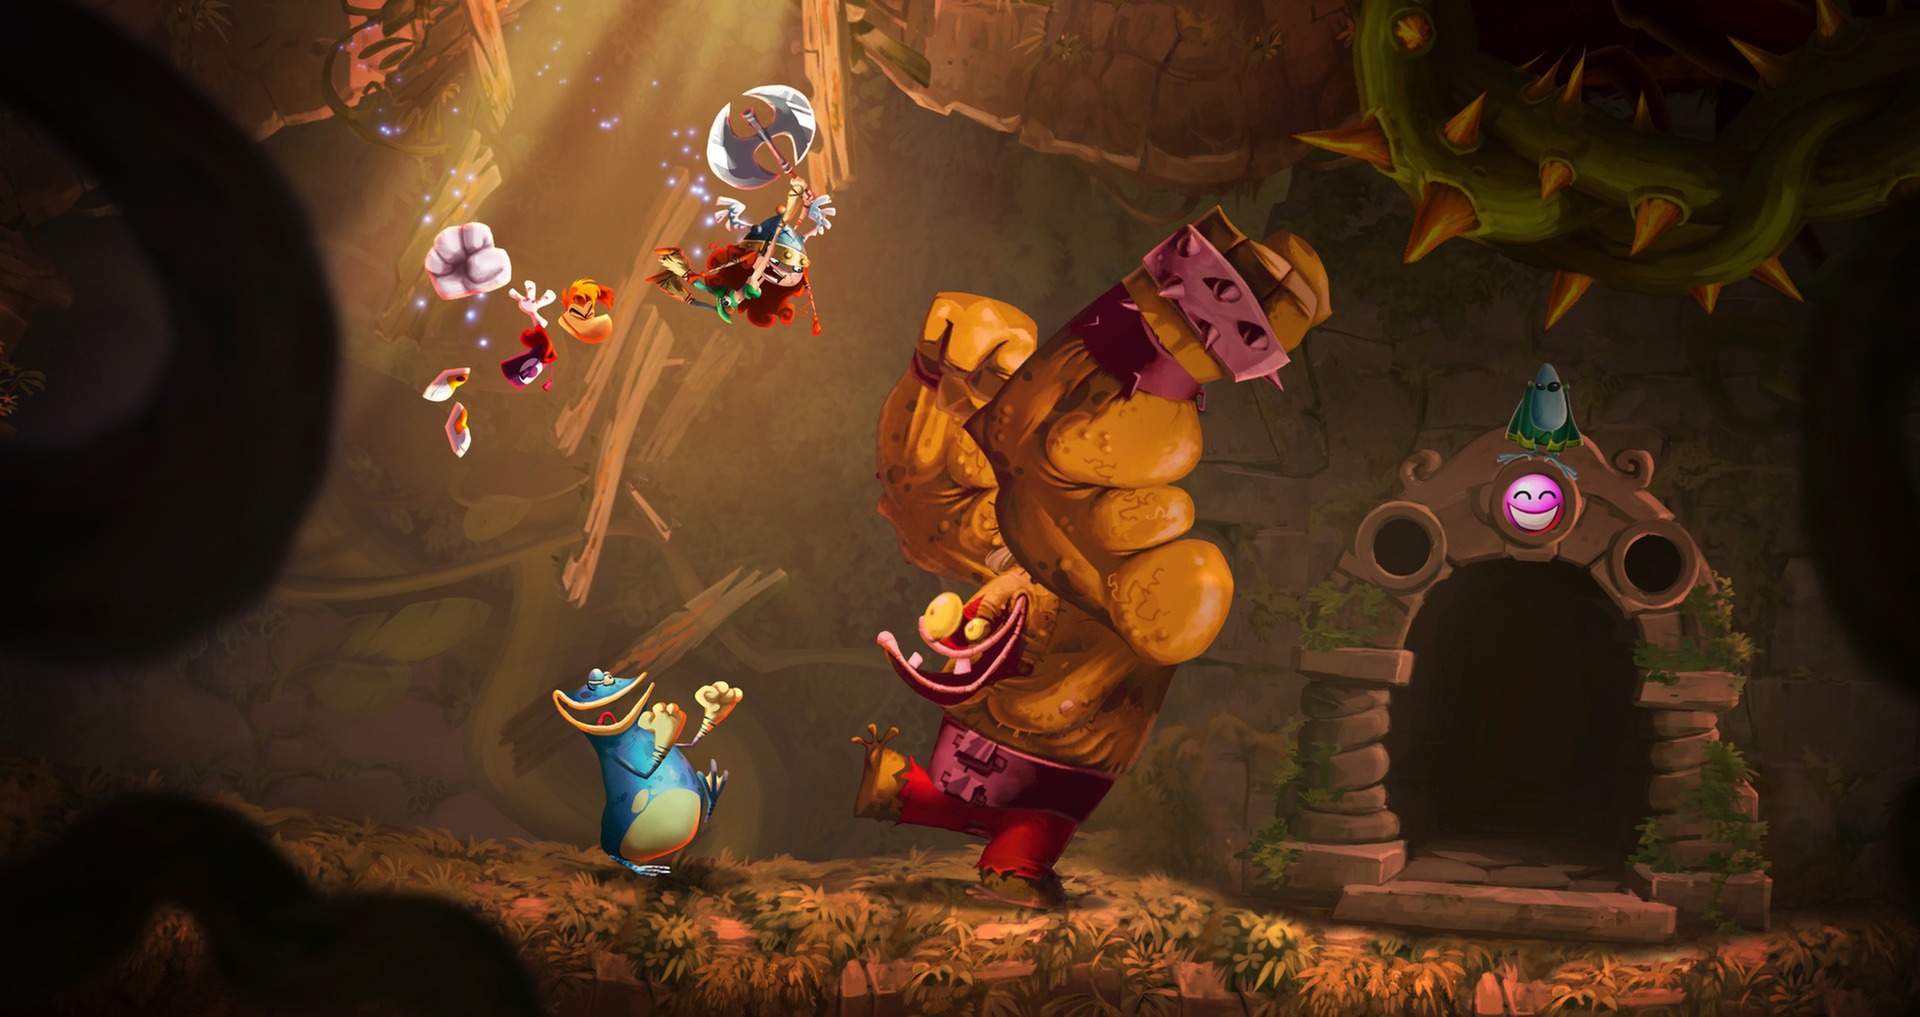 Rayman Legends - game review, release date, buy game for $5.99, system  requirements, similar games - Ensiplay